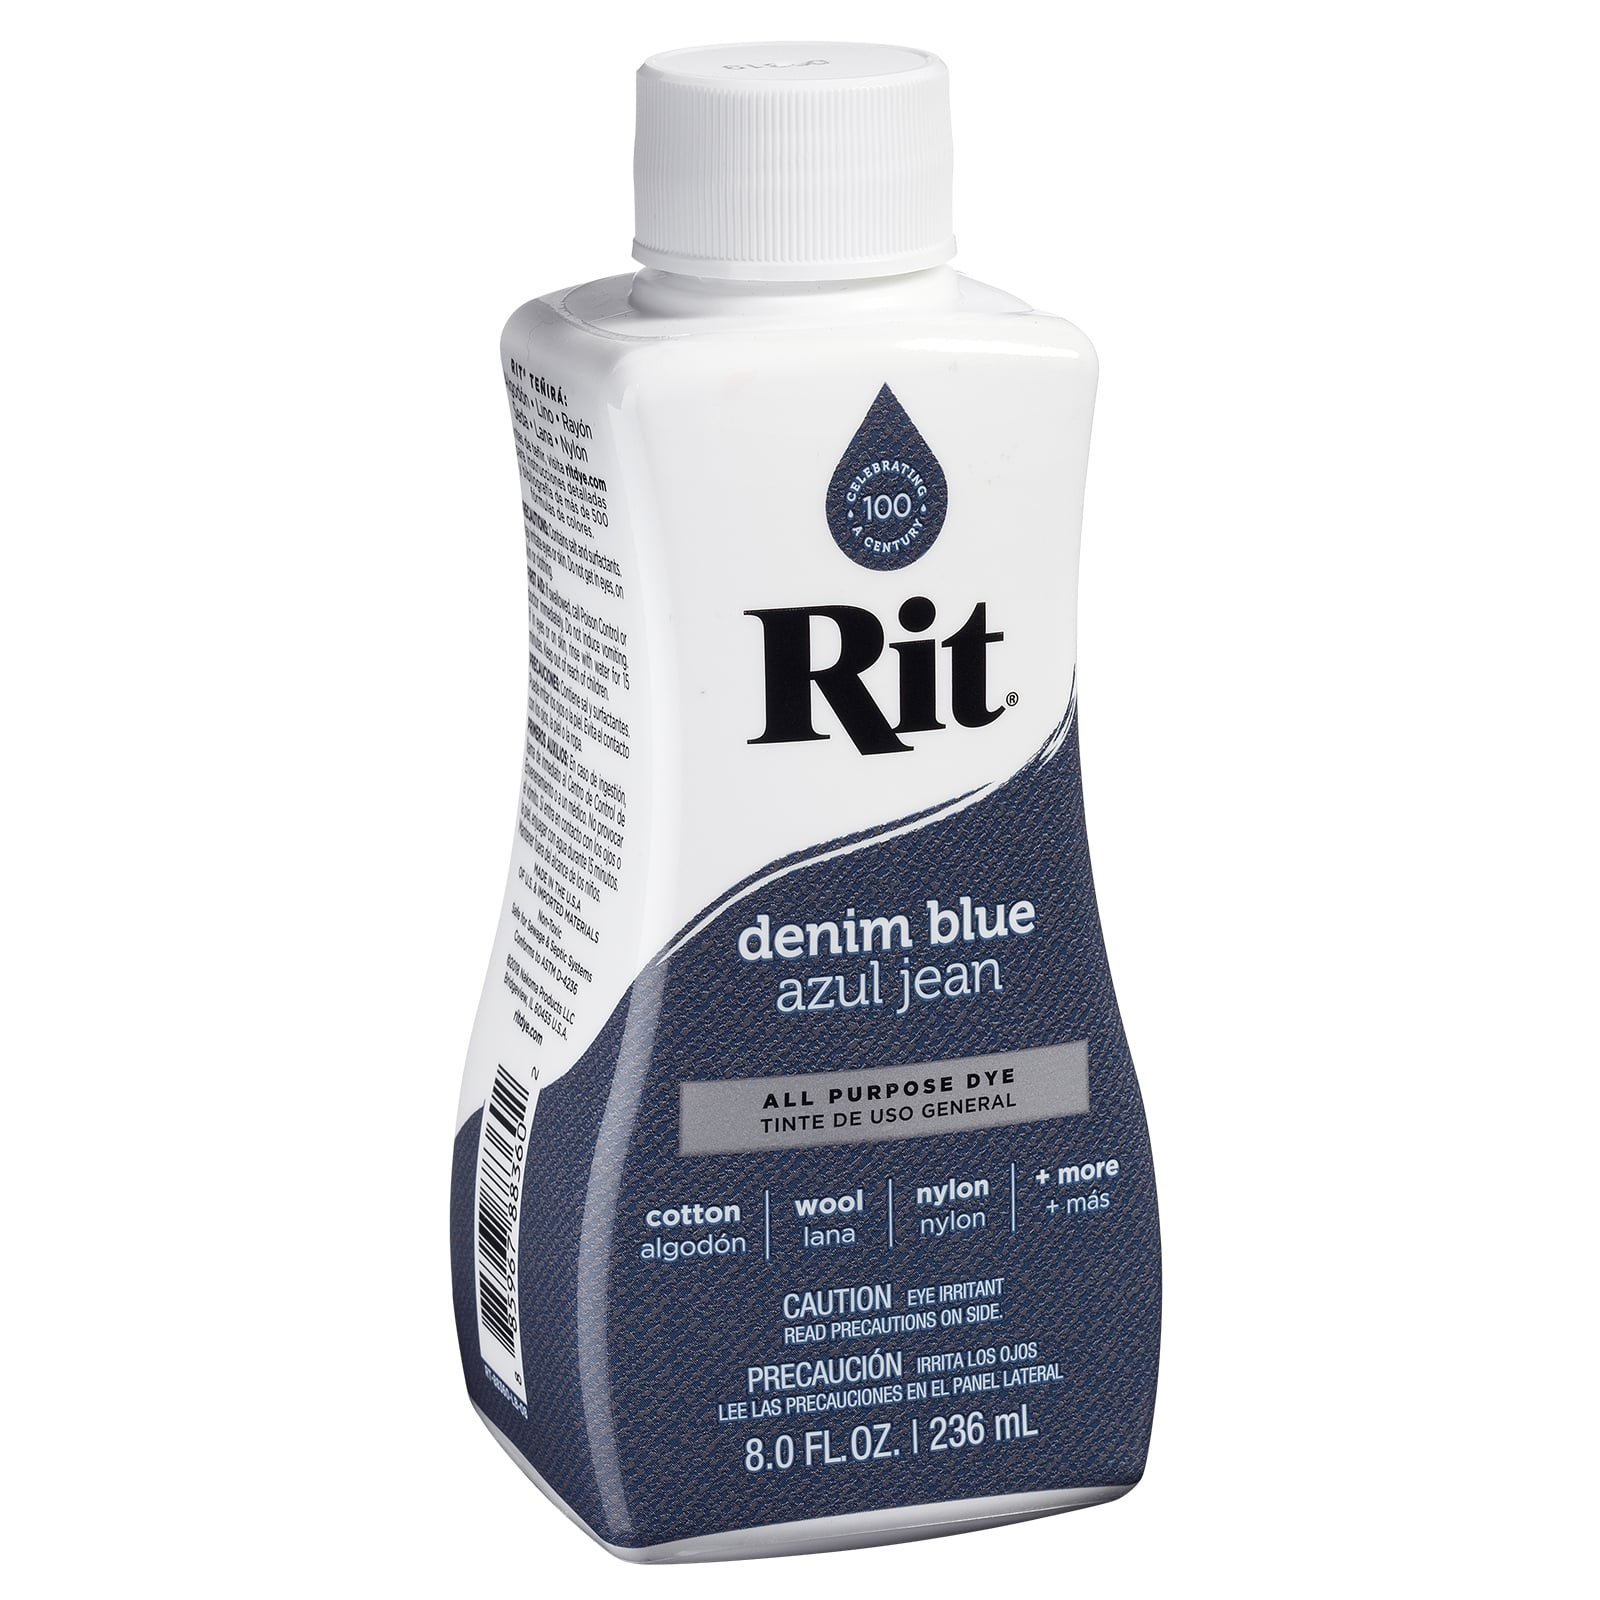 Find the Rit® Laundry Treatment Colour Remover at Michaels